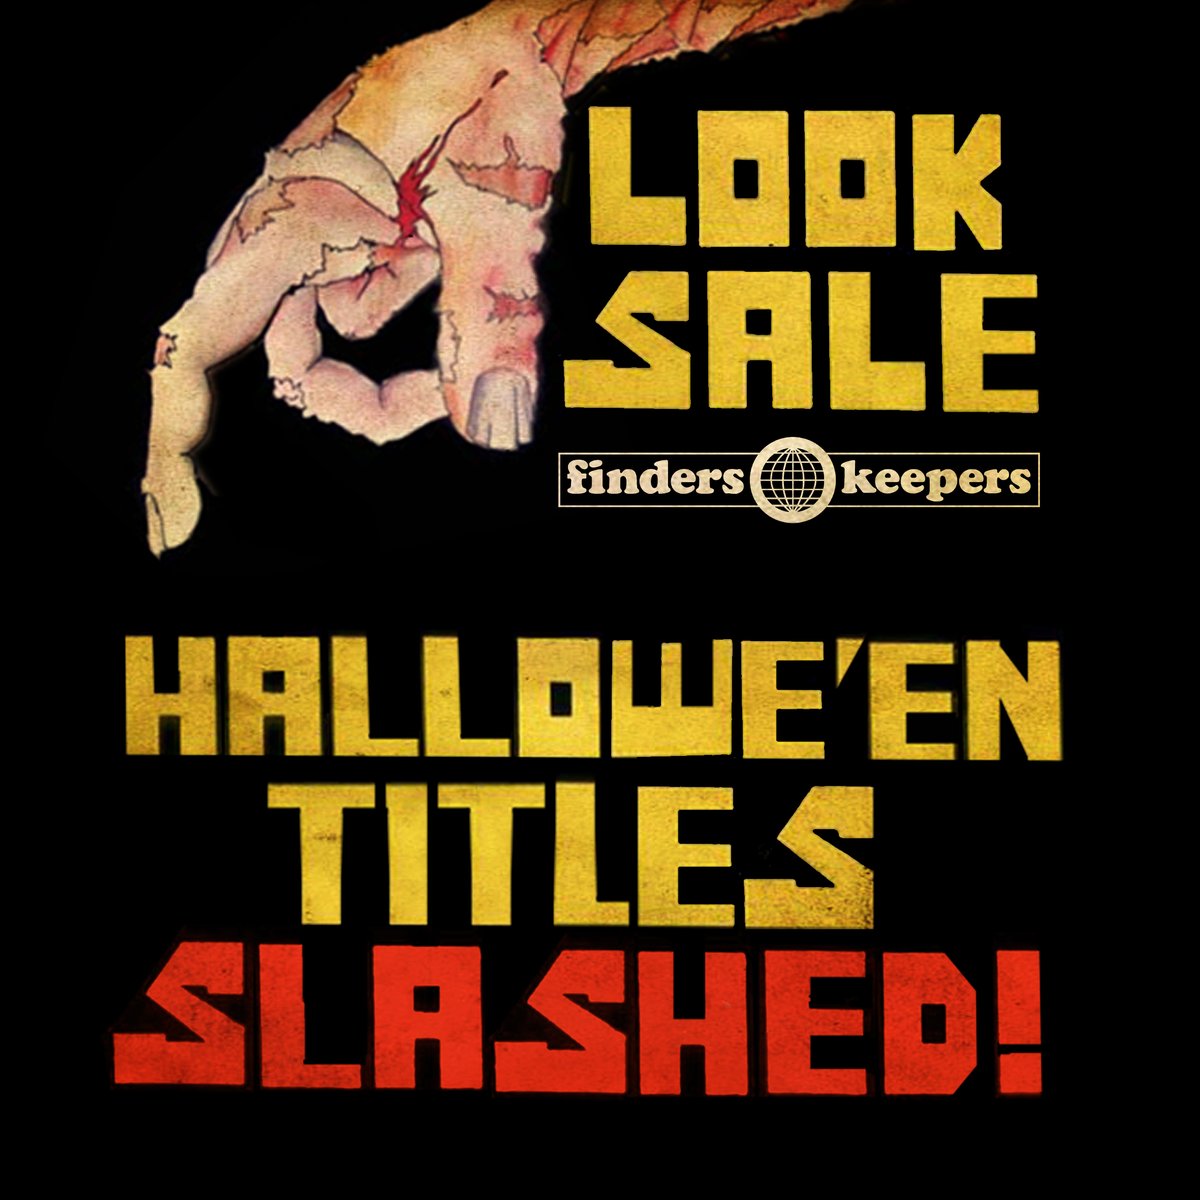 Having fearlessly liberated numerous dedicated global horror and thriller OSTs over the past 18 years we have everything you need to welcome the sabbat this All Hallow's Eve with our expansive array of nerve jangling DJ friendly black(mass) wax releases at special slashed prices!